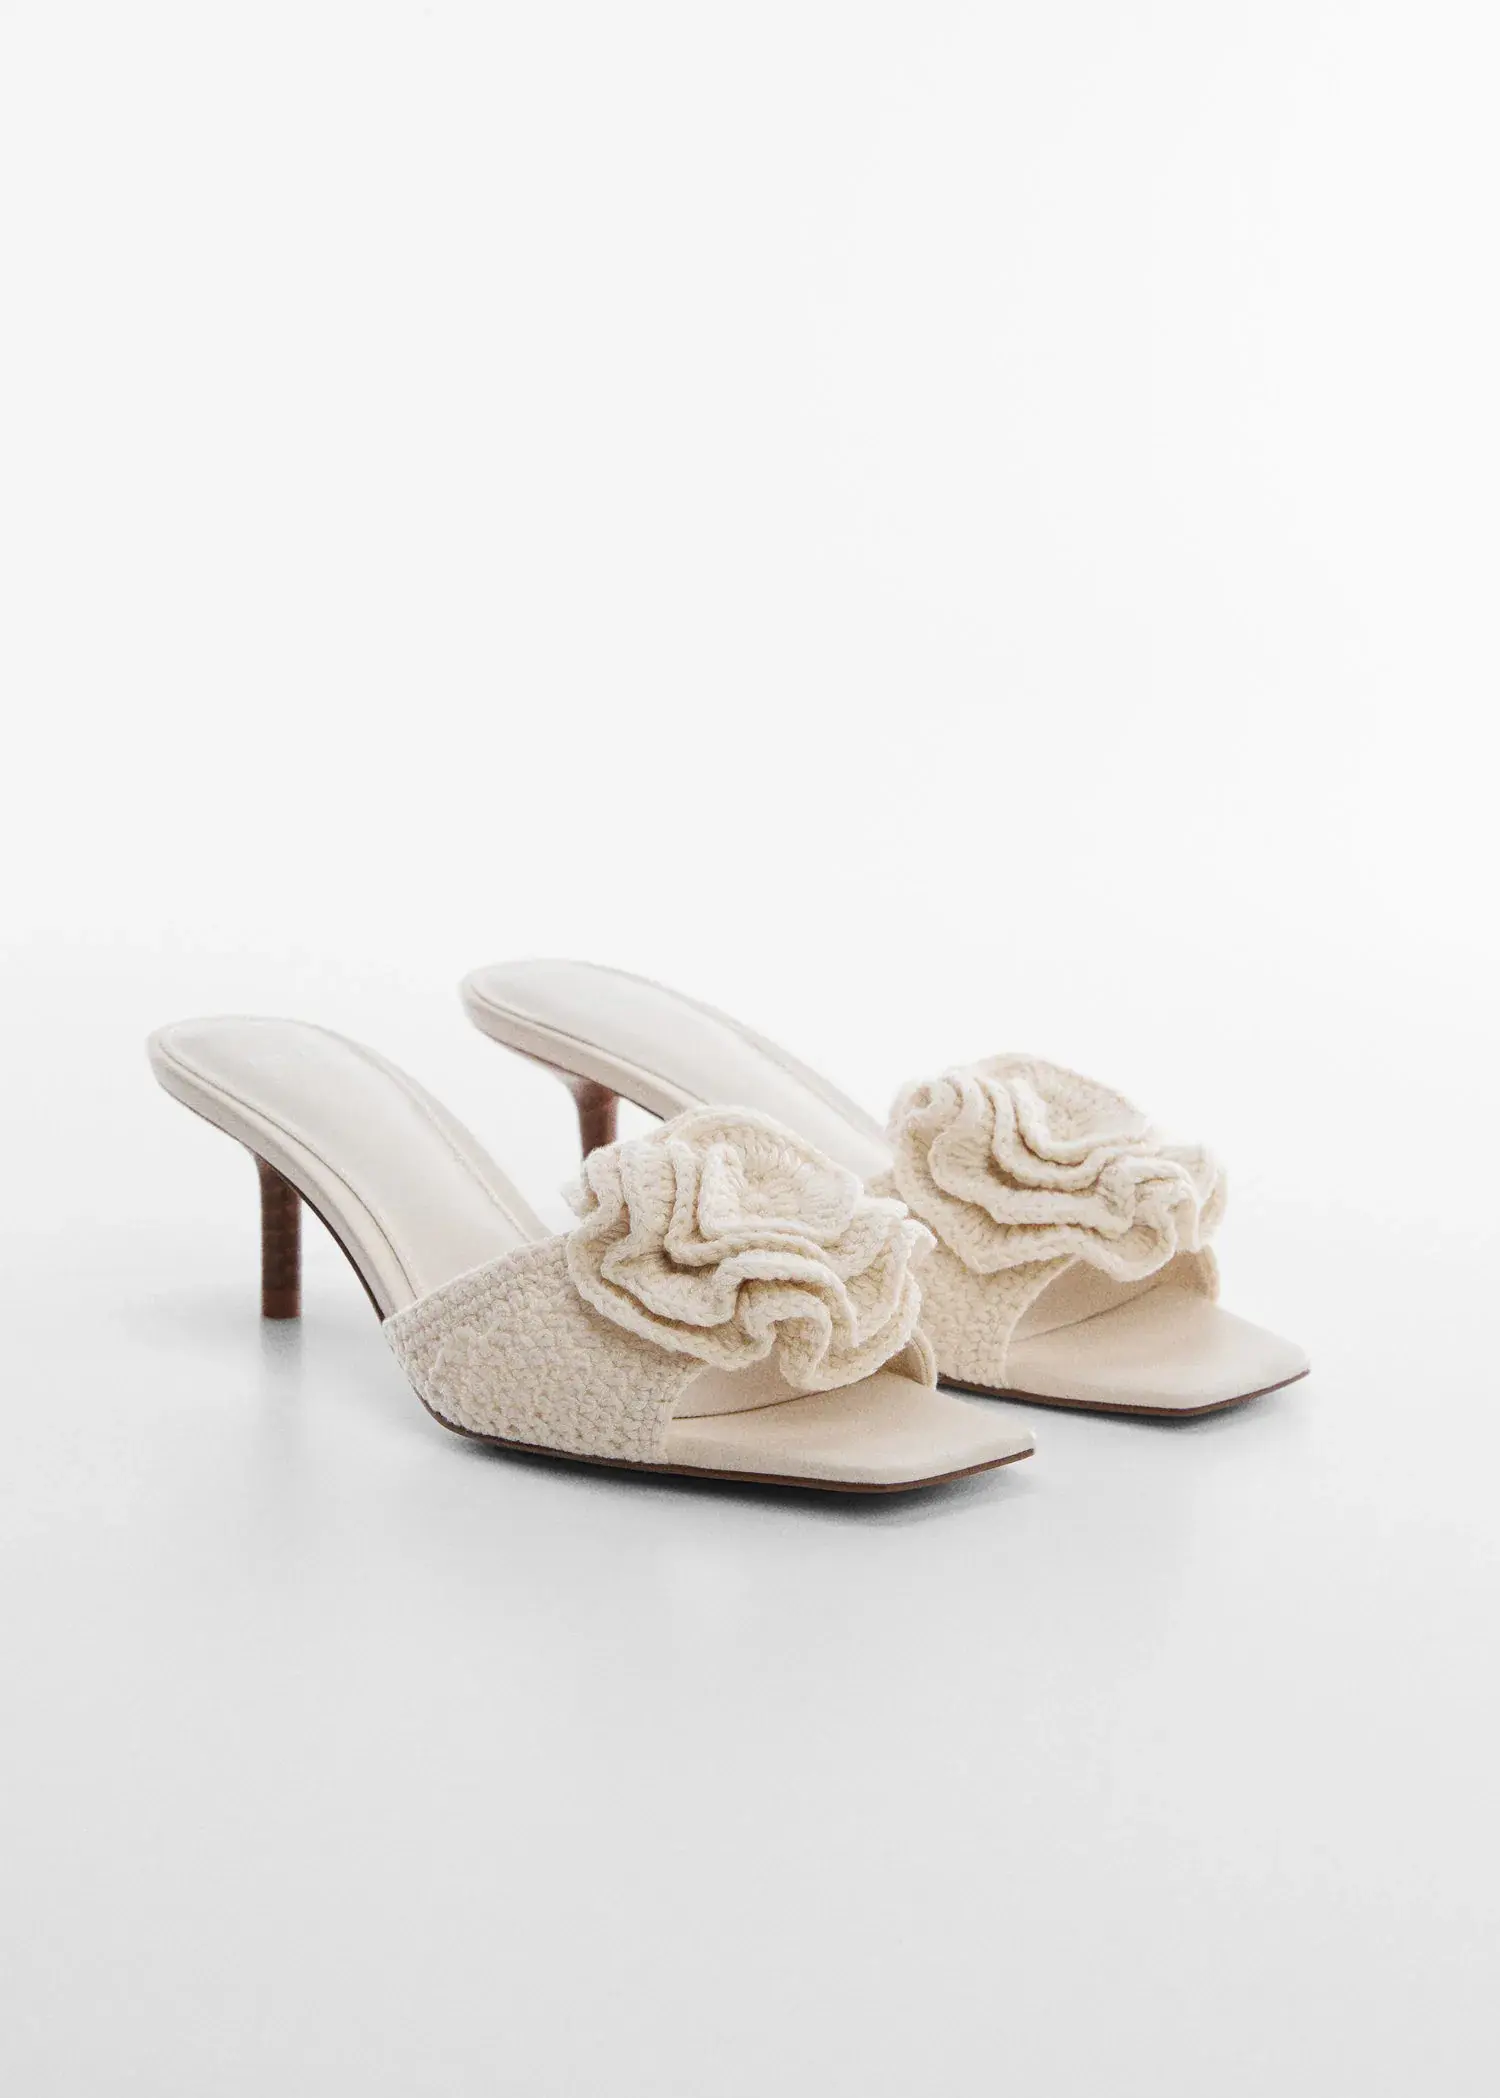 Mango Crochet sandals with flower detail. a pair of white high heeled shoes on a white surface. 